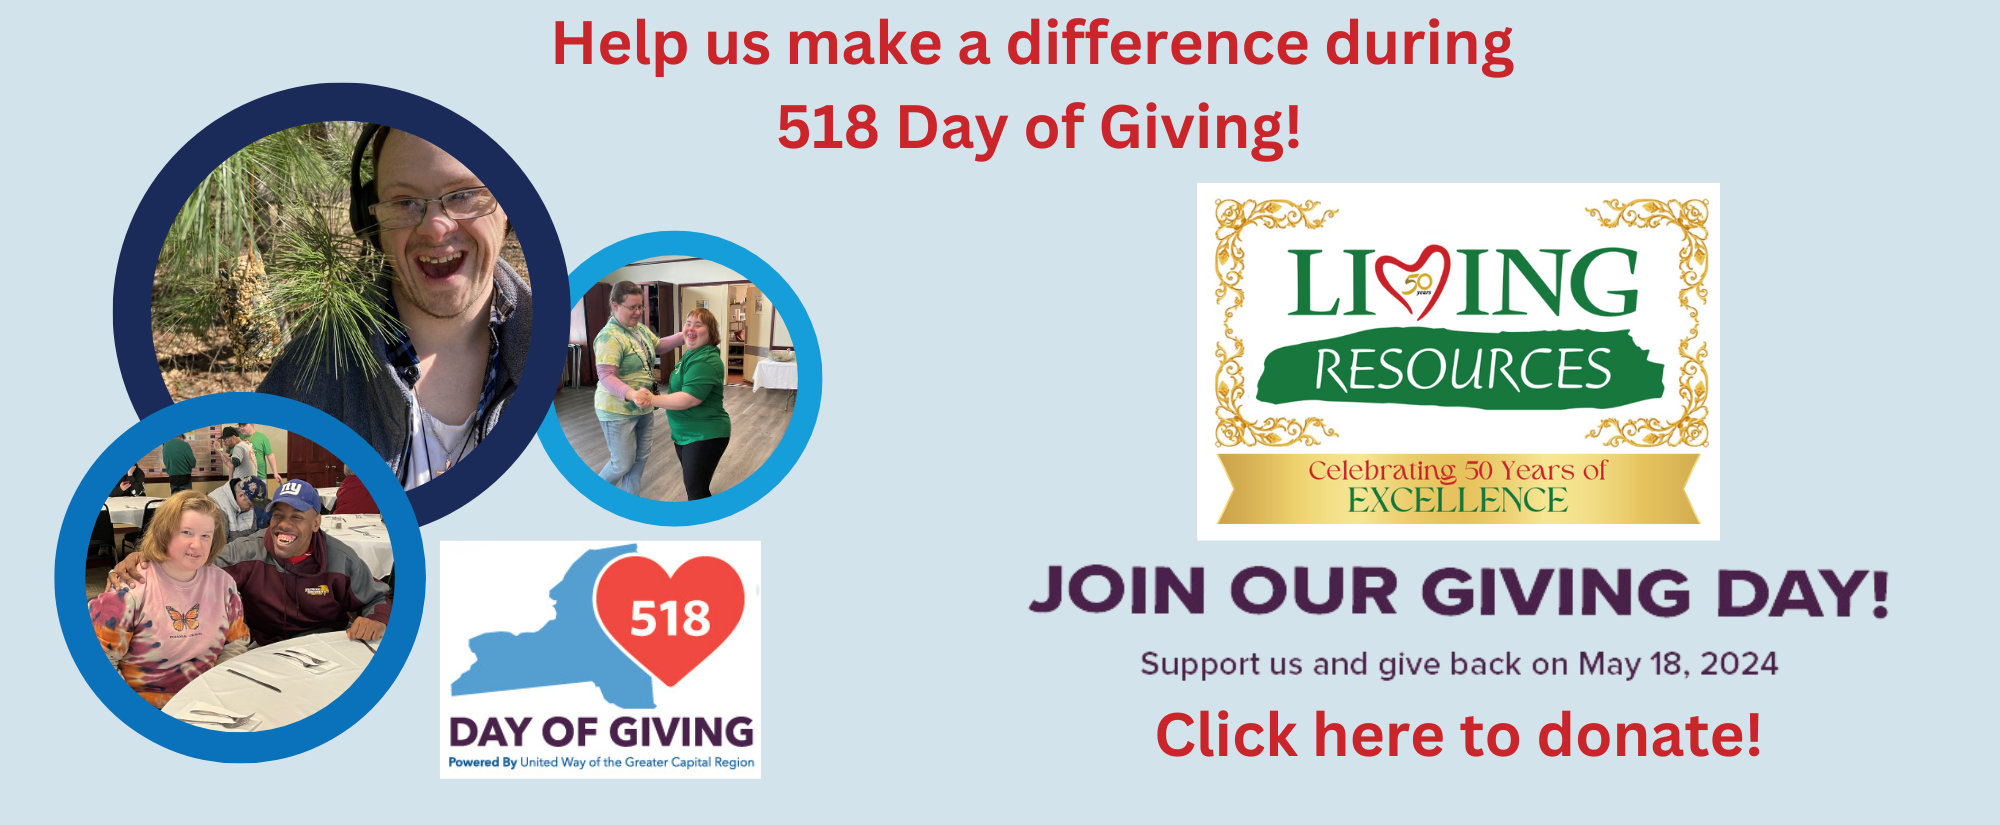 Text reads: Help us make a difference during 518 Day of Giving. Join our giving day! Support us and give back on May 18, 2024. Click here to donate!